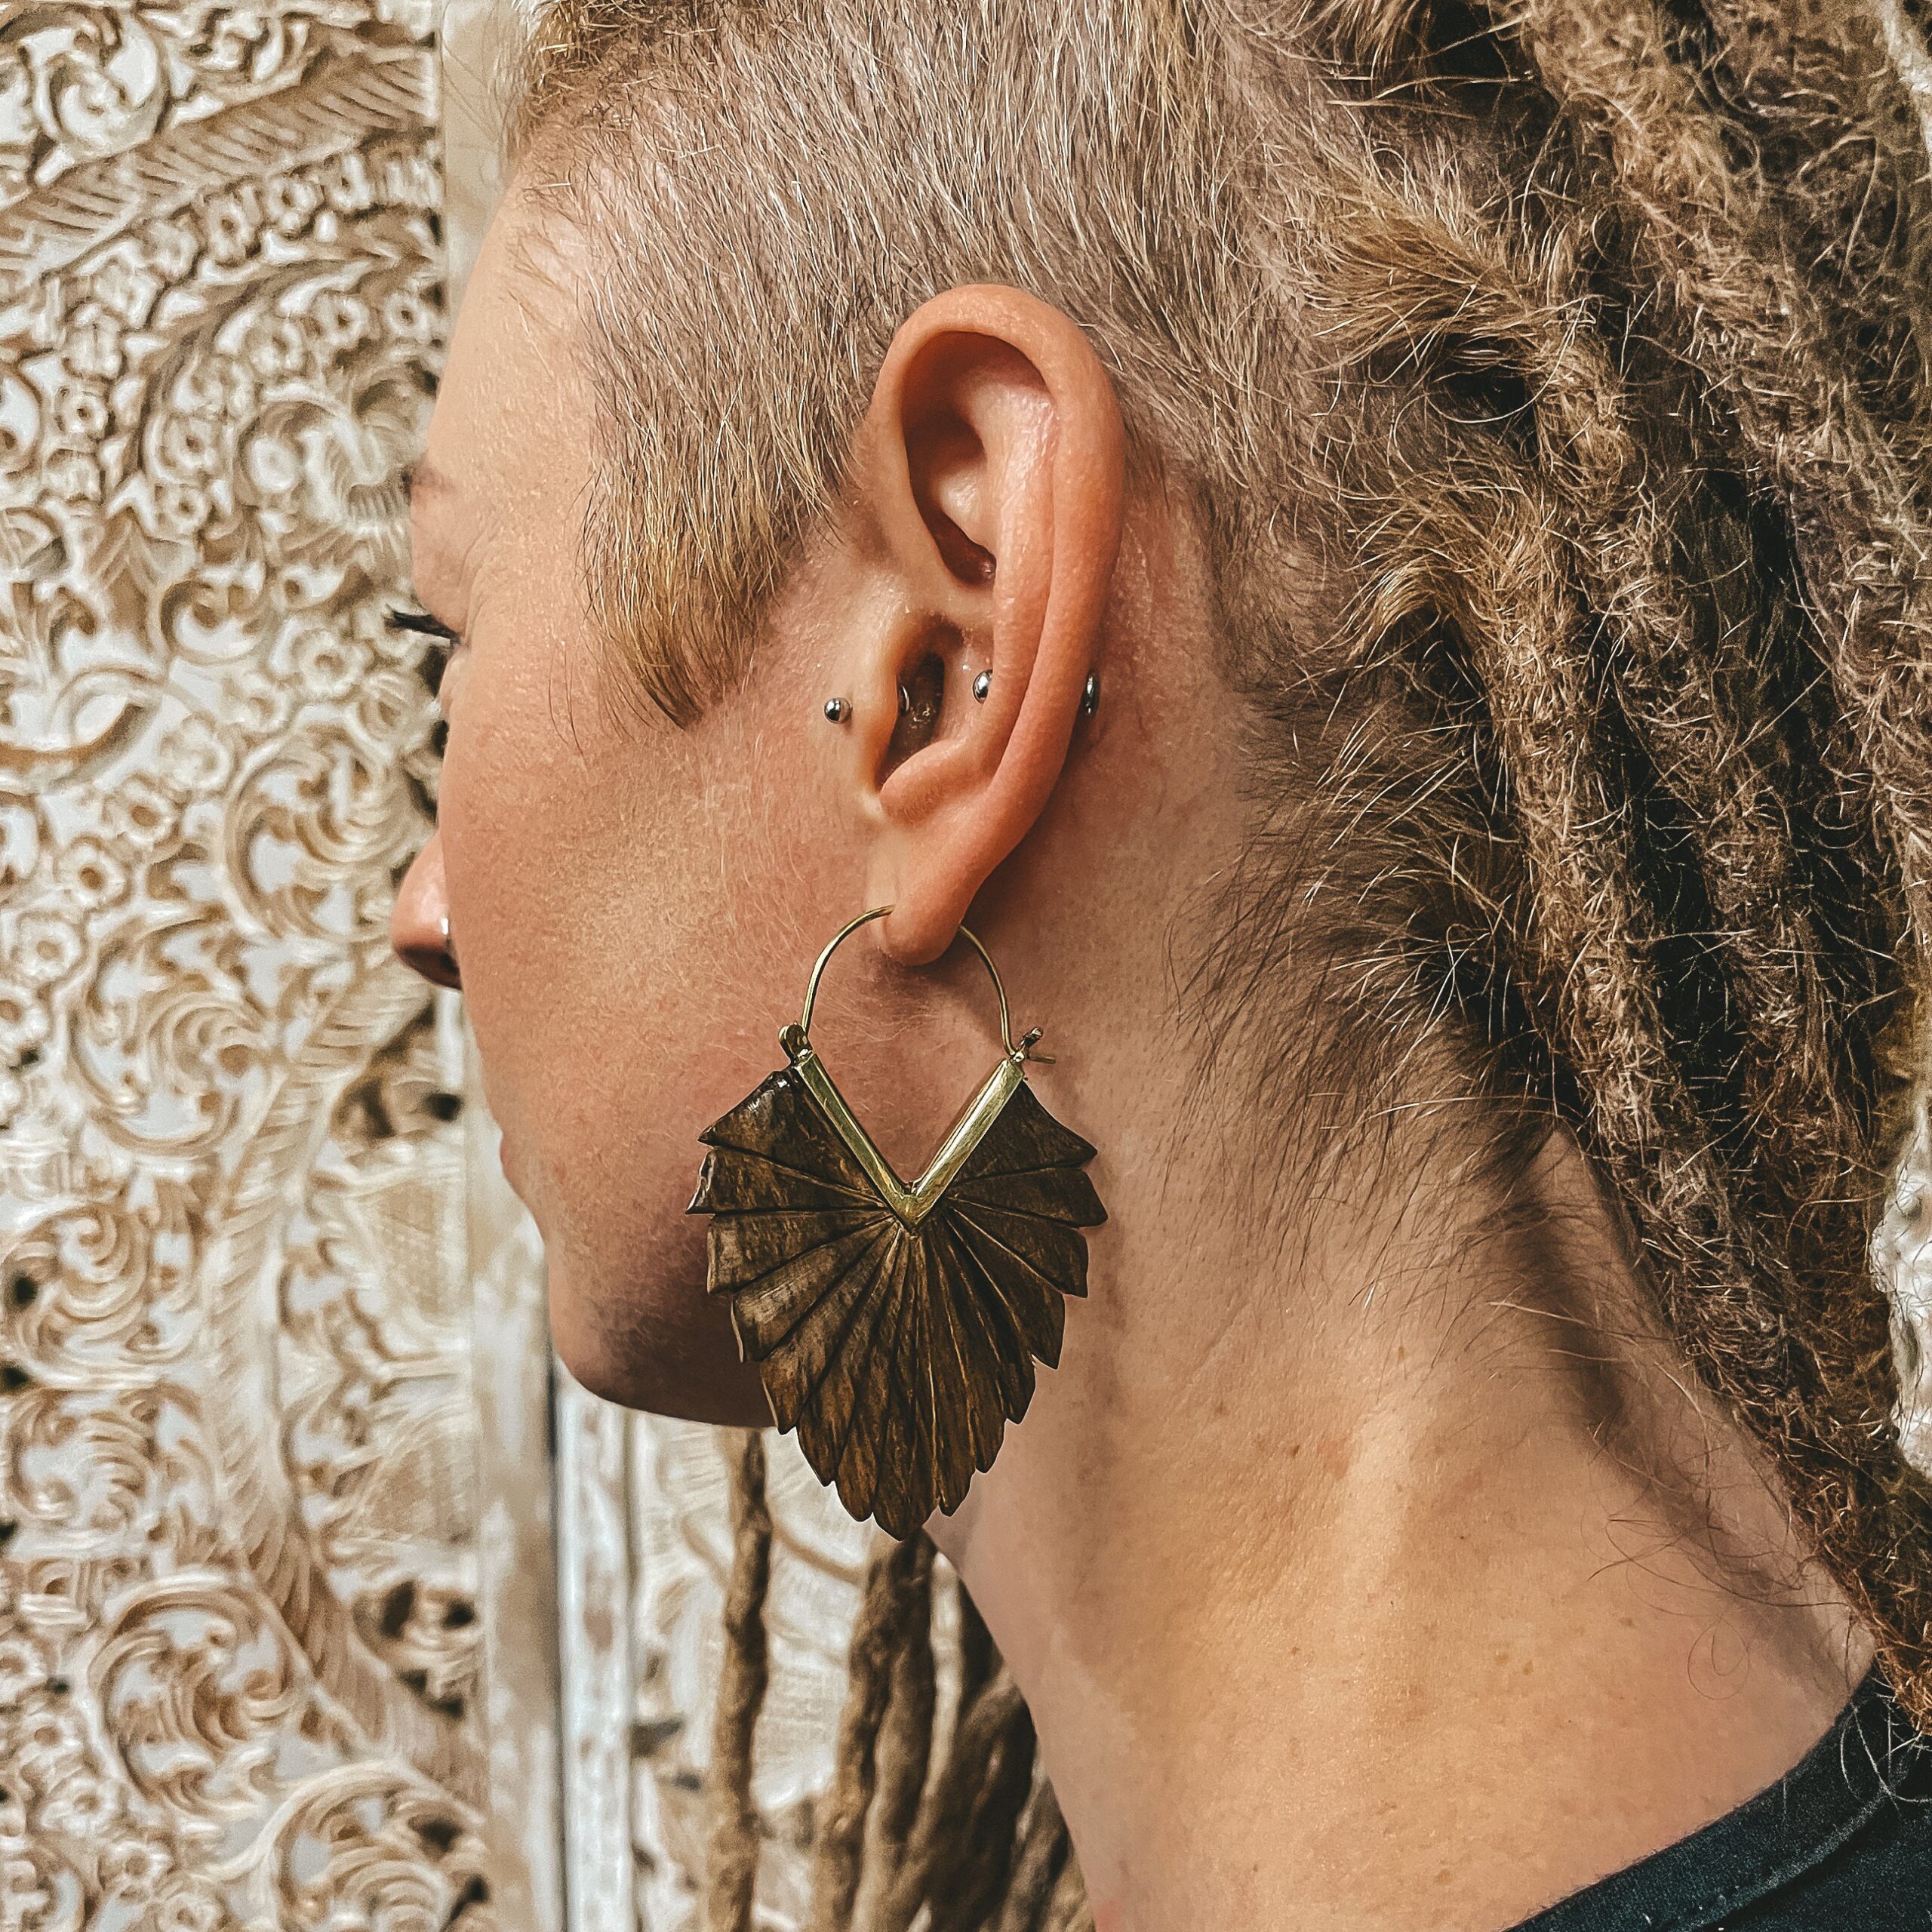 Wooden Sago Tribal Earrings Handmade Ethnic Carved Wood with a Bronze Clasp in gold colour on a blonde girl with dreadlocks and engrabed wooden distressed white backdrop boho style